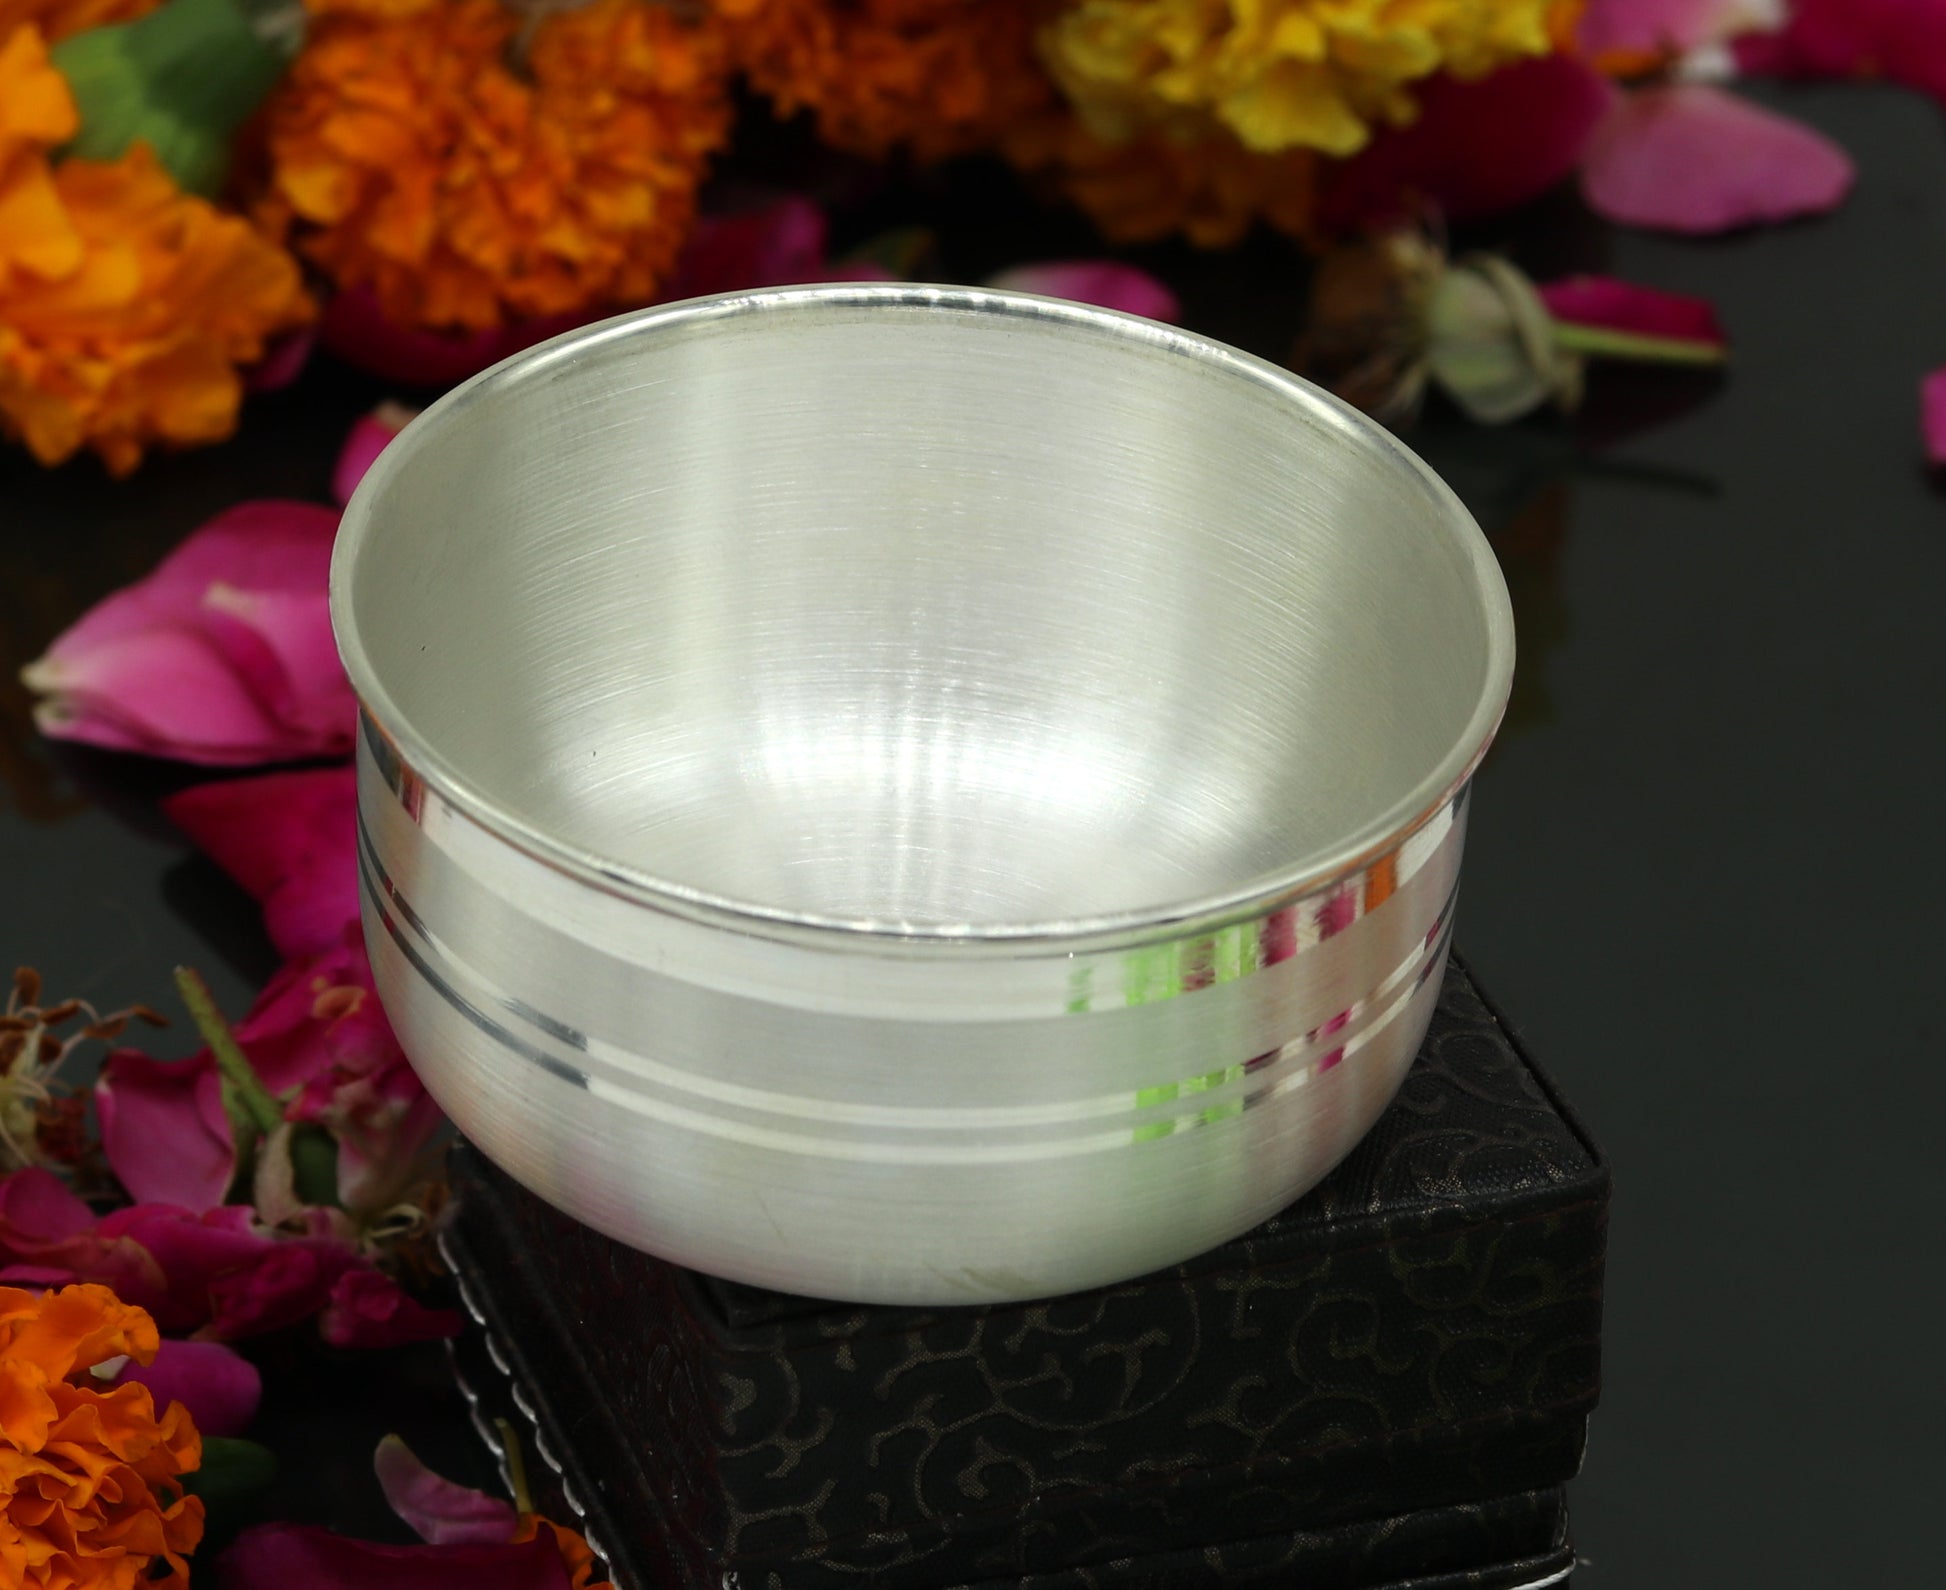 999 pure sterling silver handmade solid silver bowl kitchen utensils, vessels, silver has antibacterial properties, keep stay healthy sv55 - TRIBAL ORNAMENTS